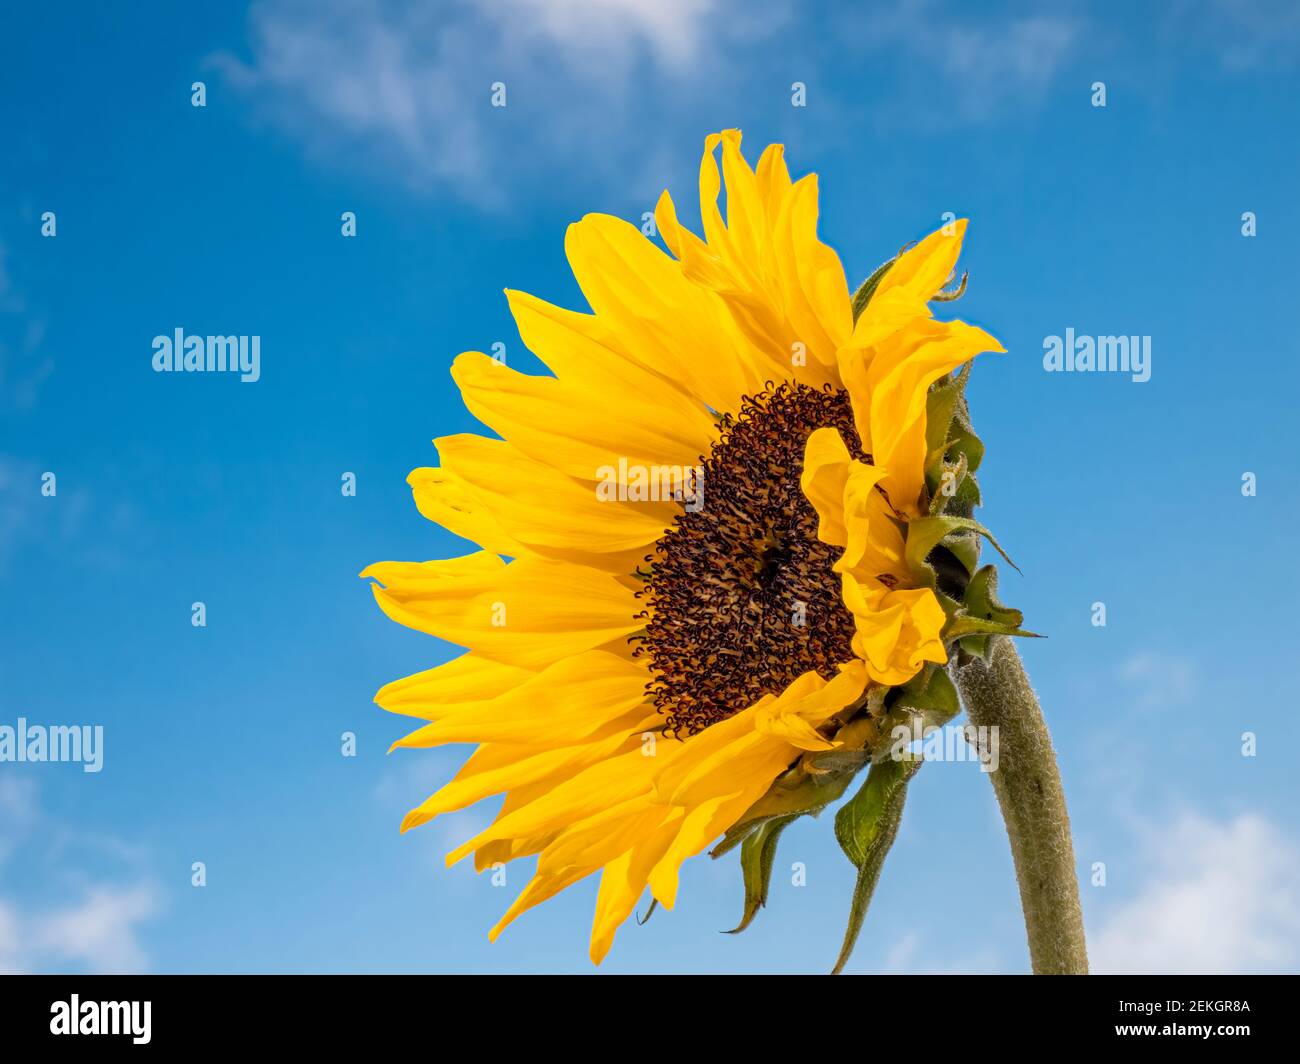 Close-up of yellow sunflower (Helianthus) against blue sky Stock Photo